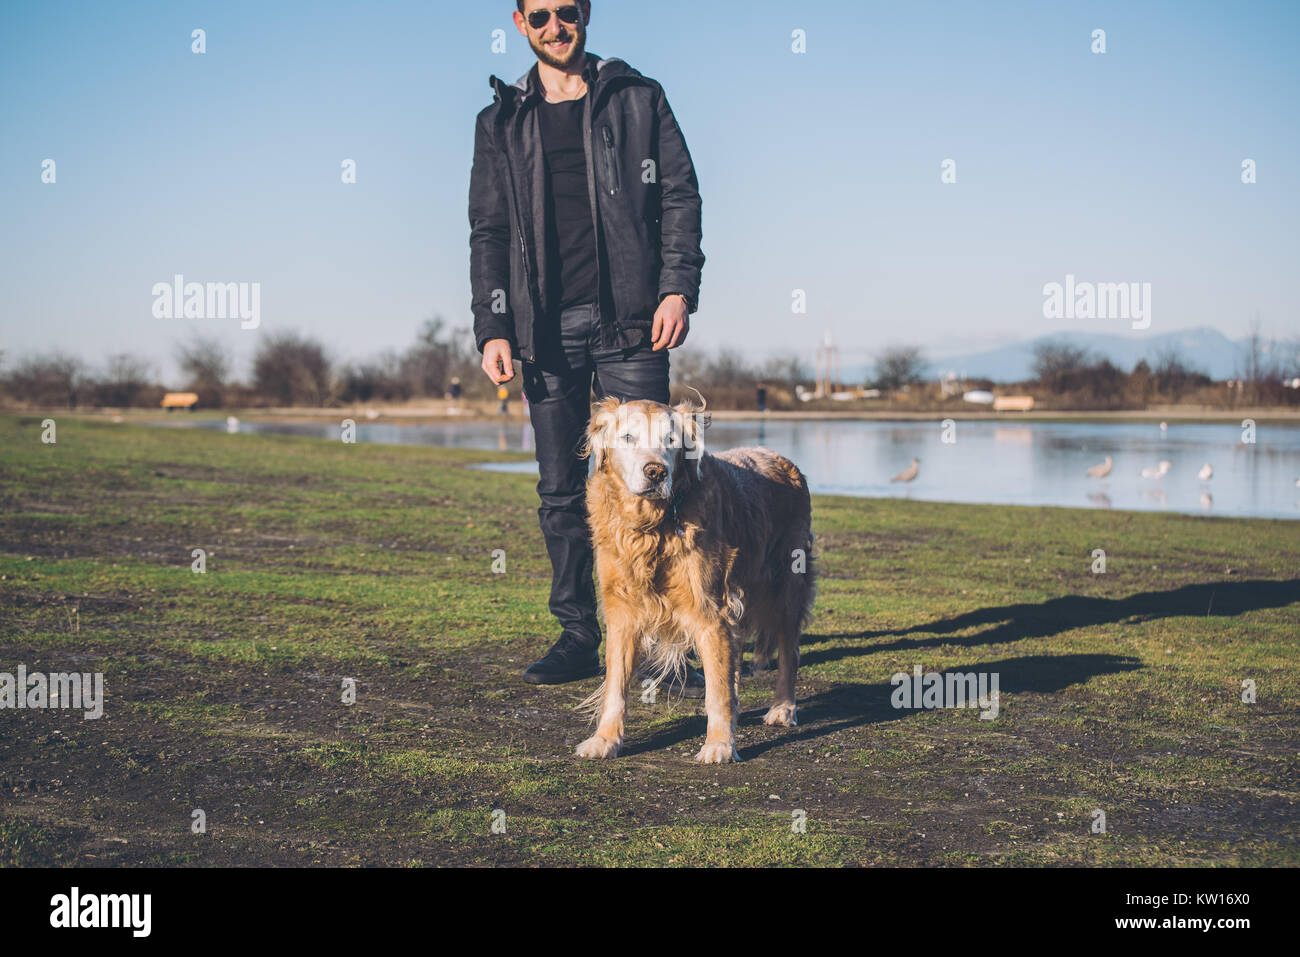 Male playing with golden retriever dog Stock Photo